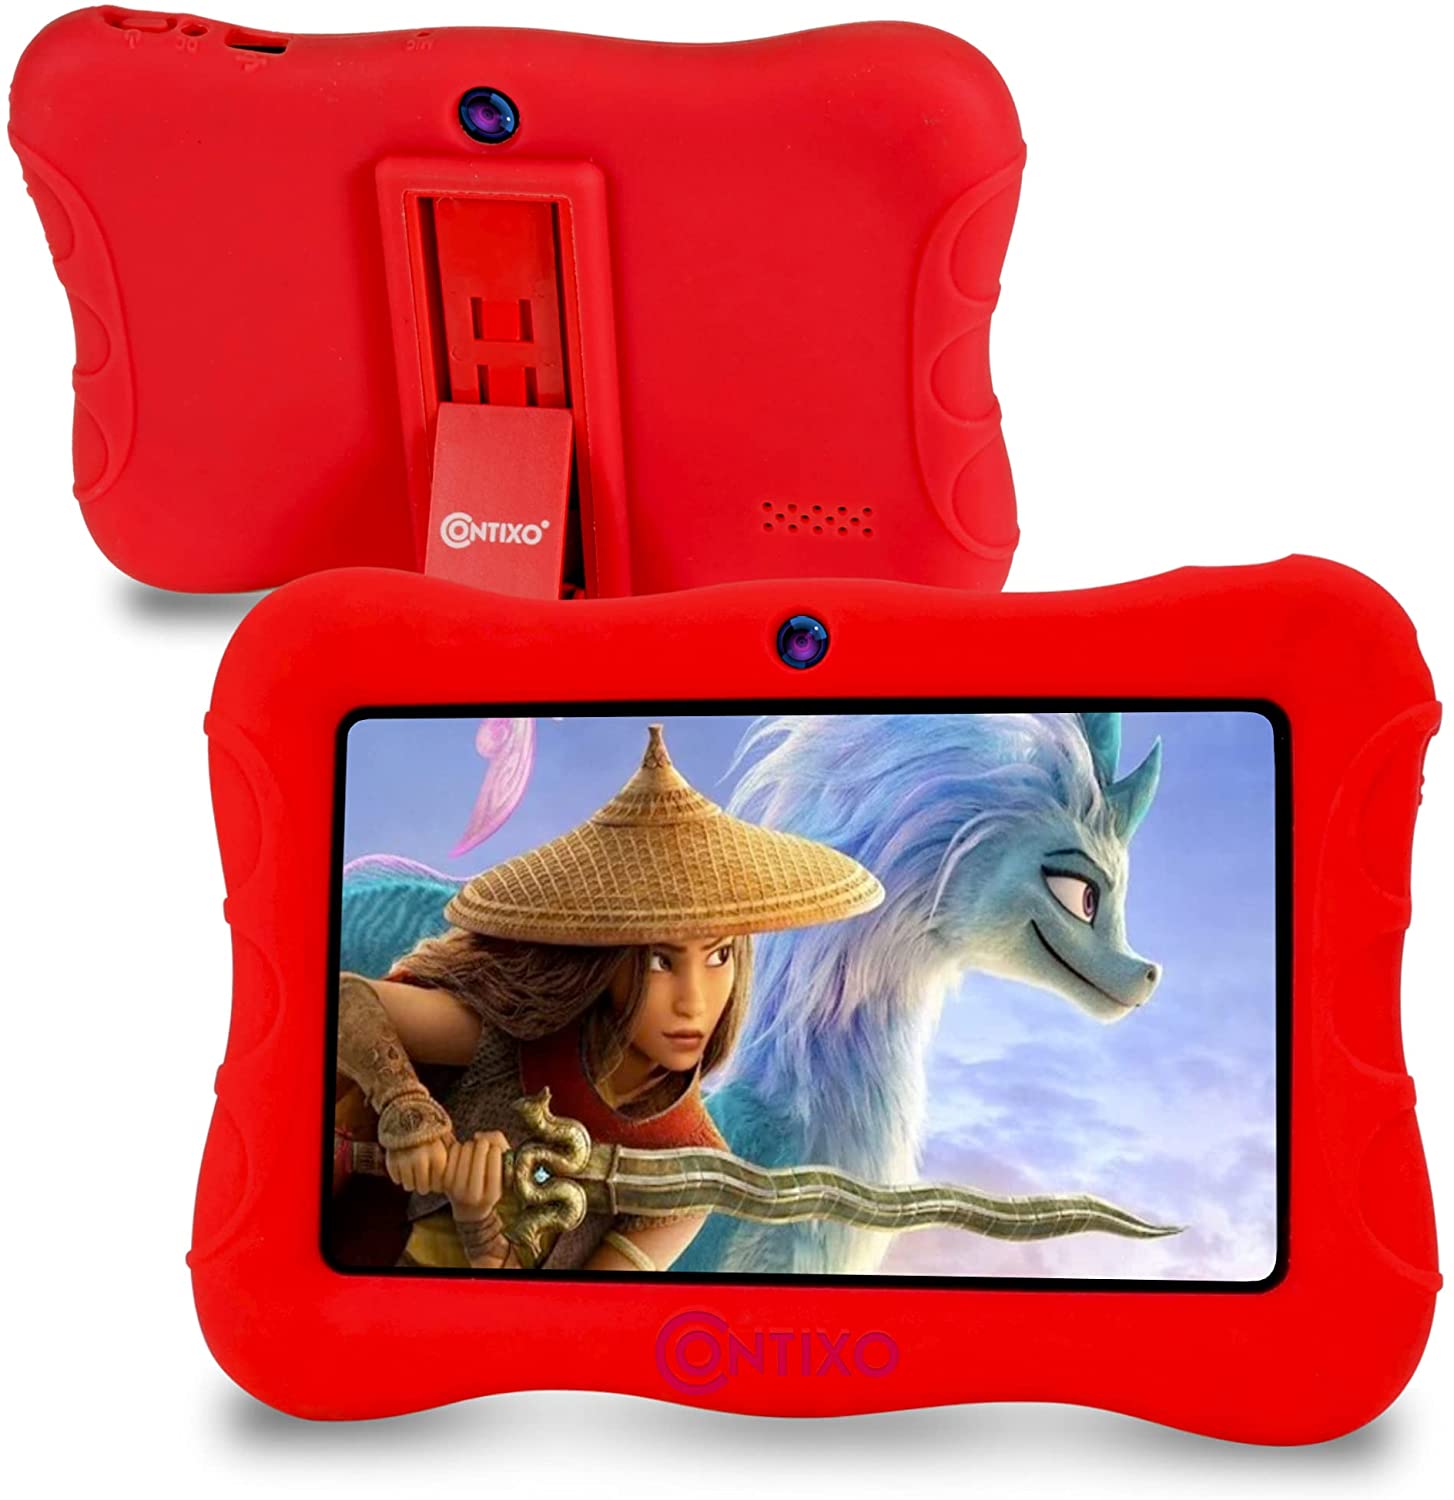 Contixo Contixo 7 inch Kids Tablet 2GB Ram 32GB Data Storage with Latest Android 10 OS Wi-Fi Blue Tooth Tablets for Kids, V9-3-32-Red | V9-3-32 RED